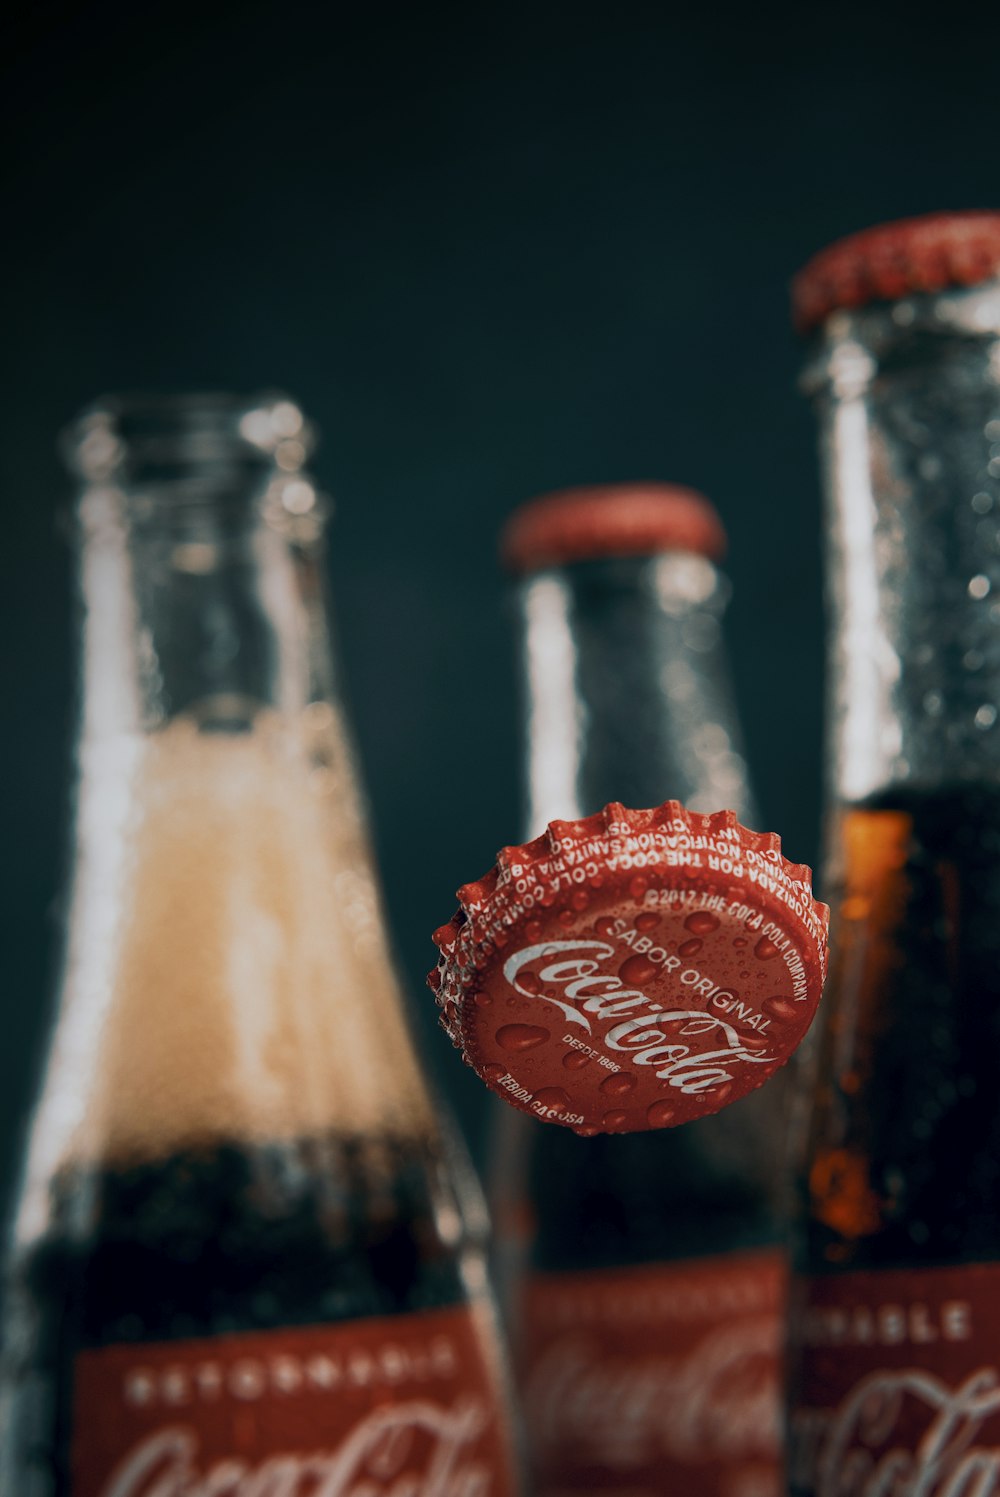 a close up of a coca - cola bottle opener